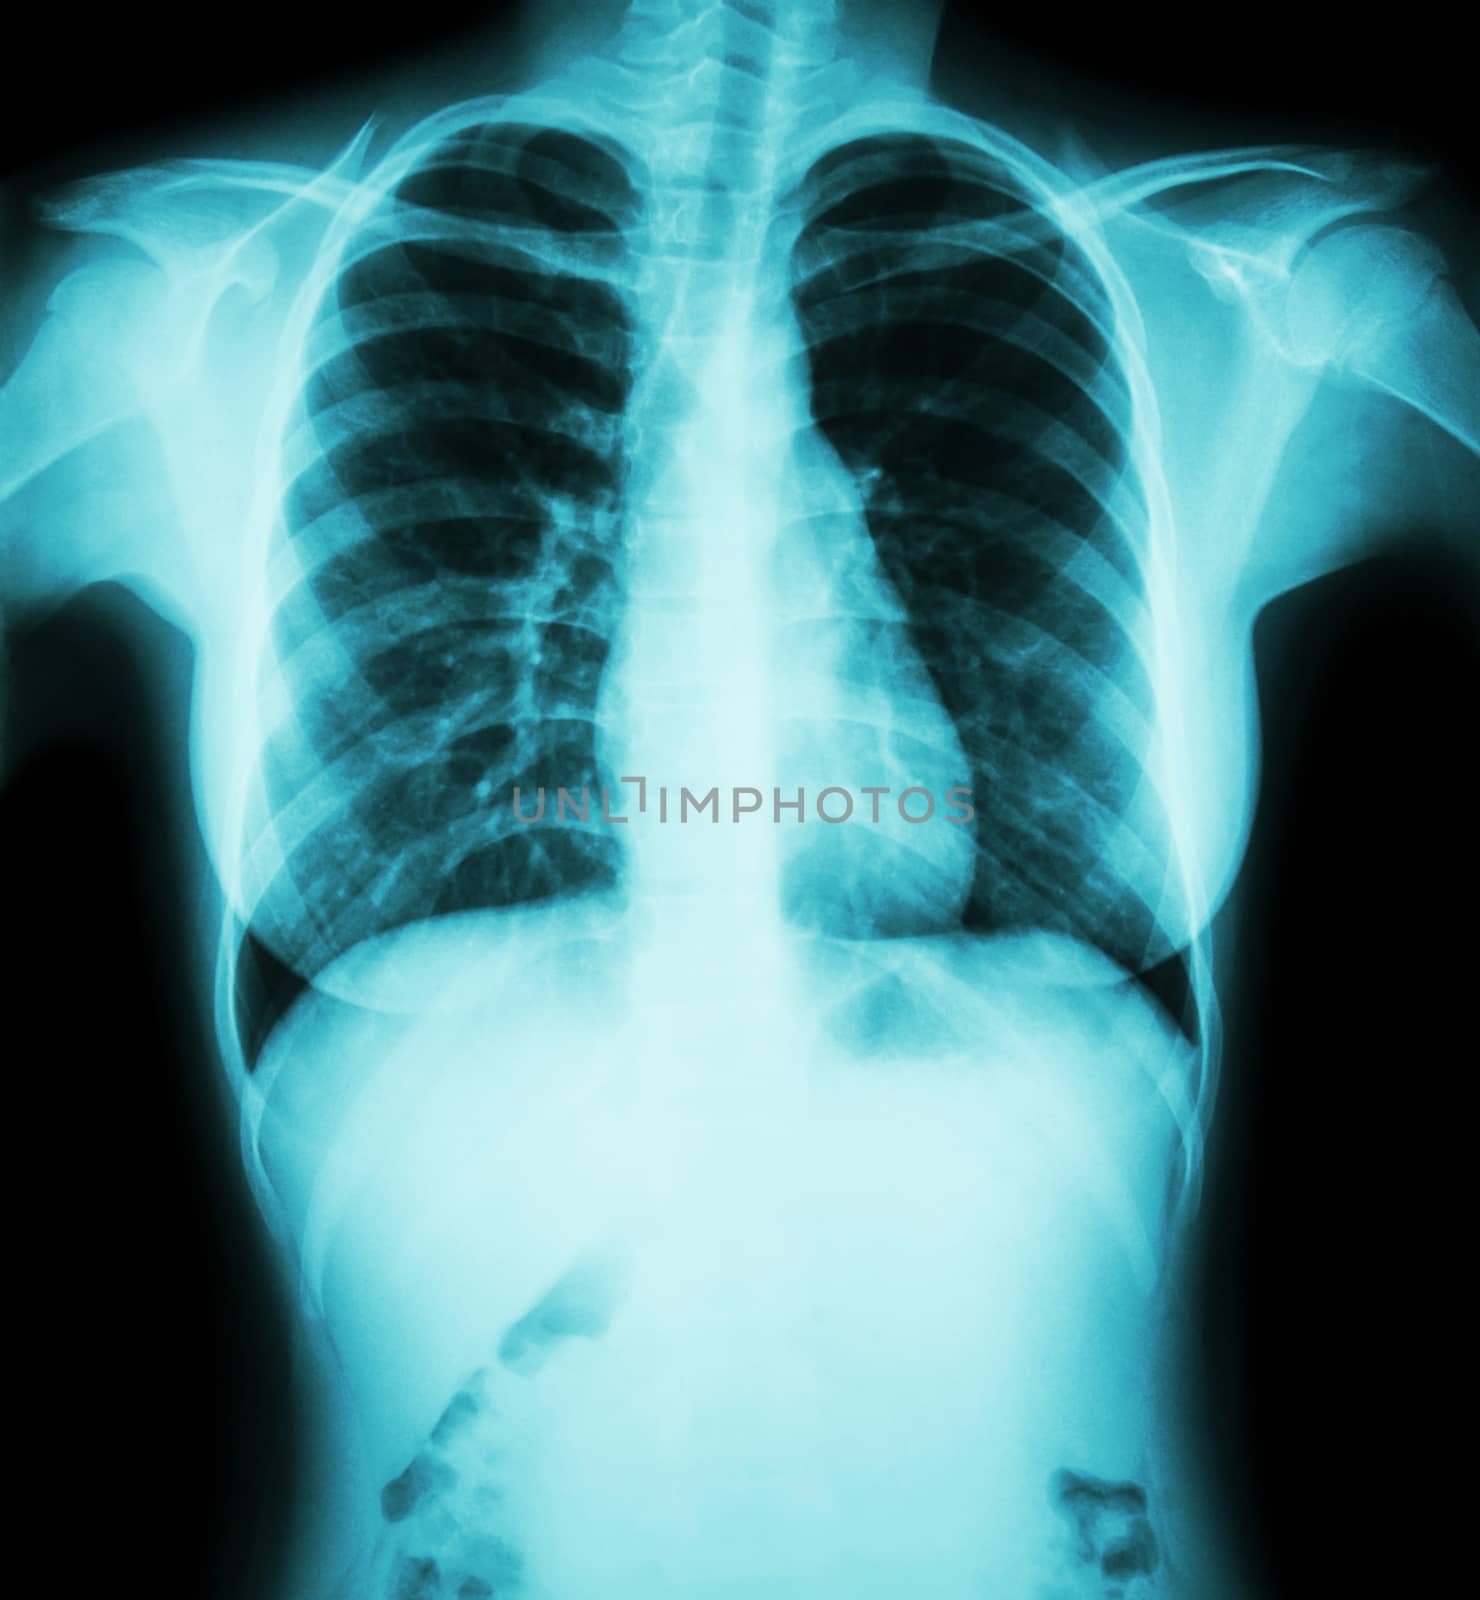 Film chest x-ray : show normal chest of woman